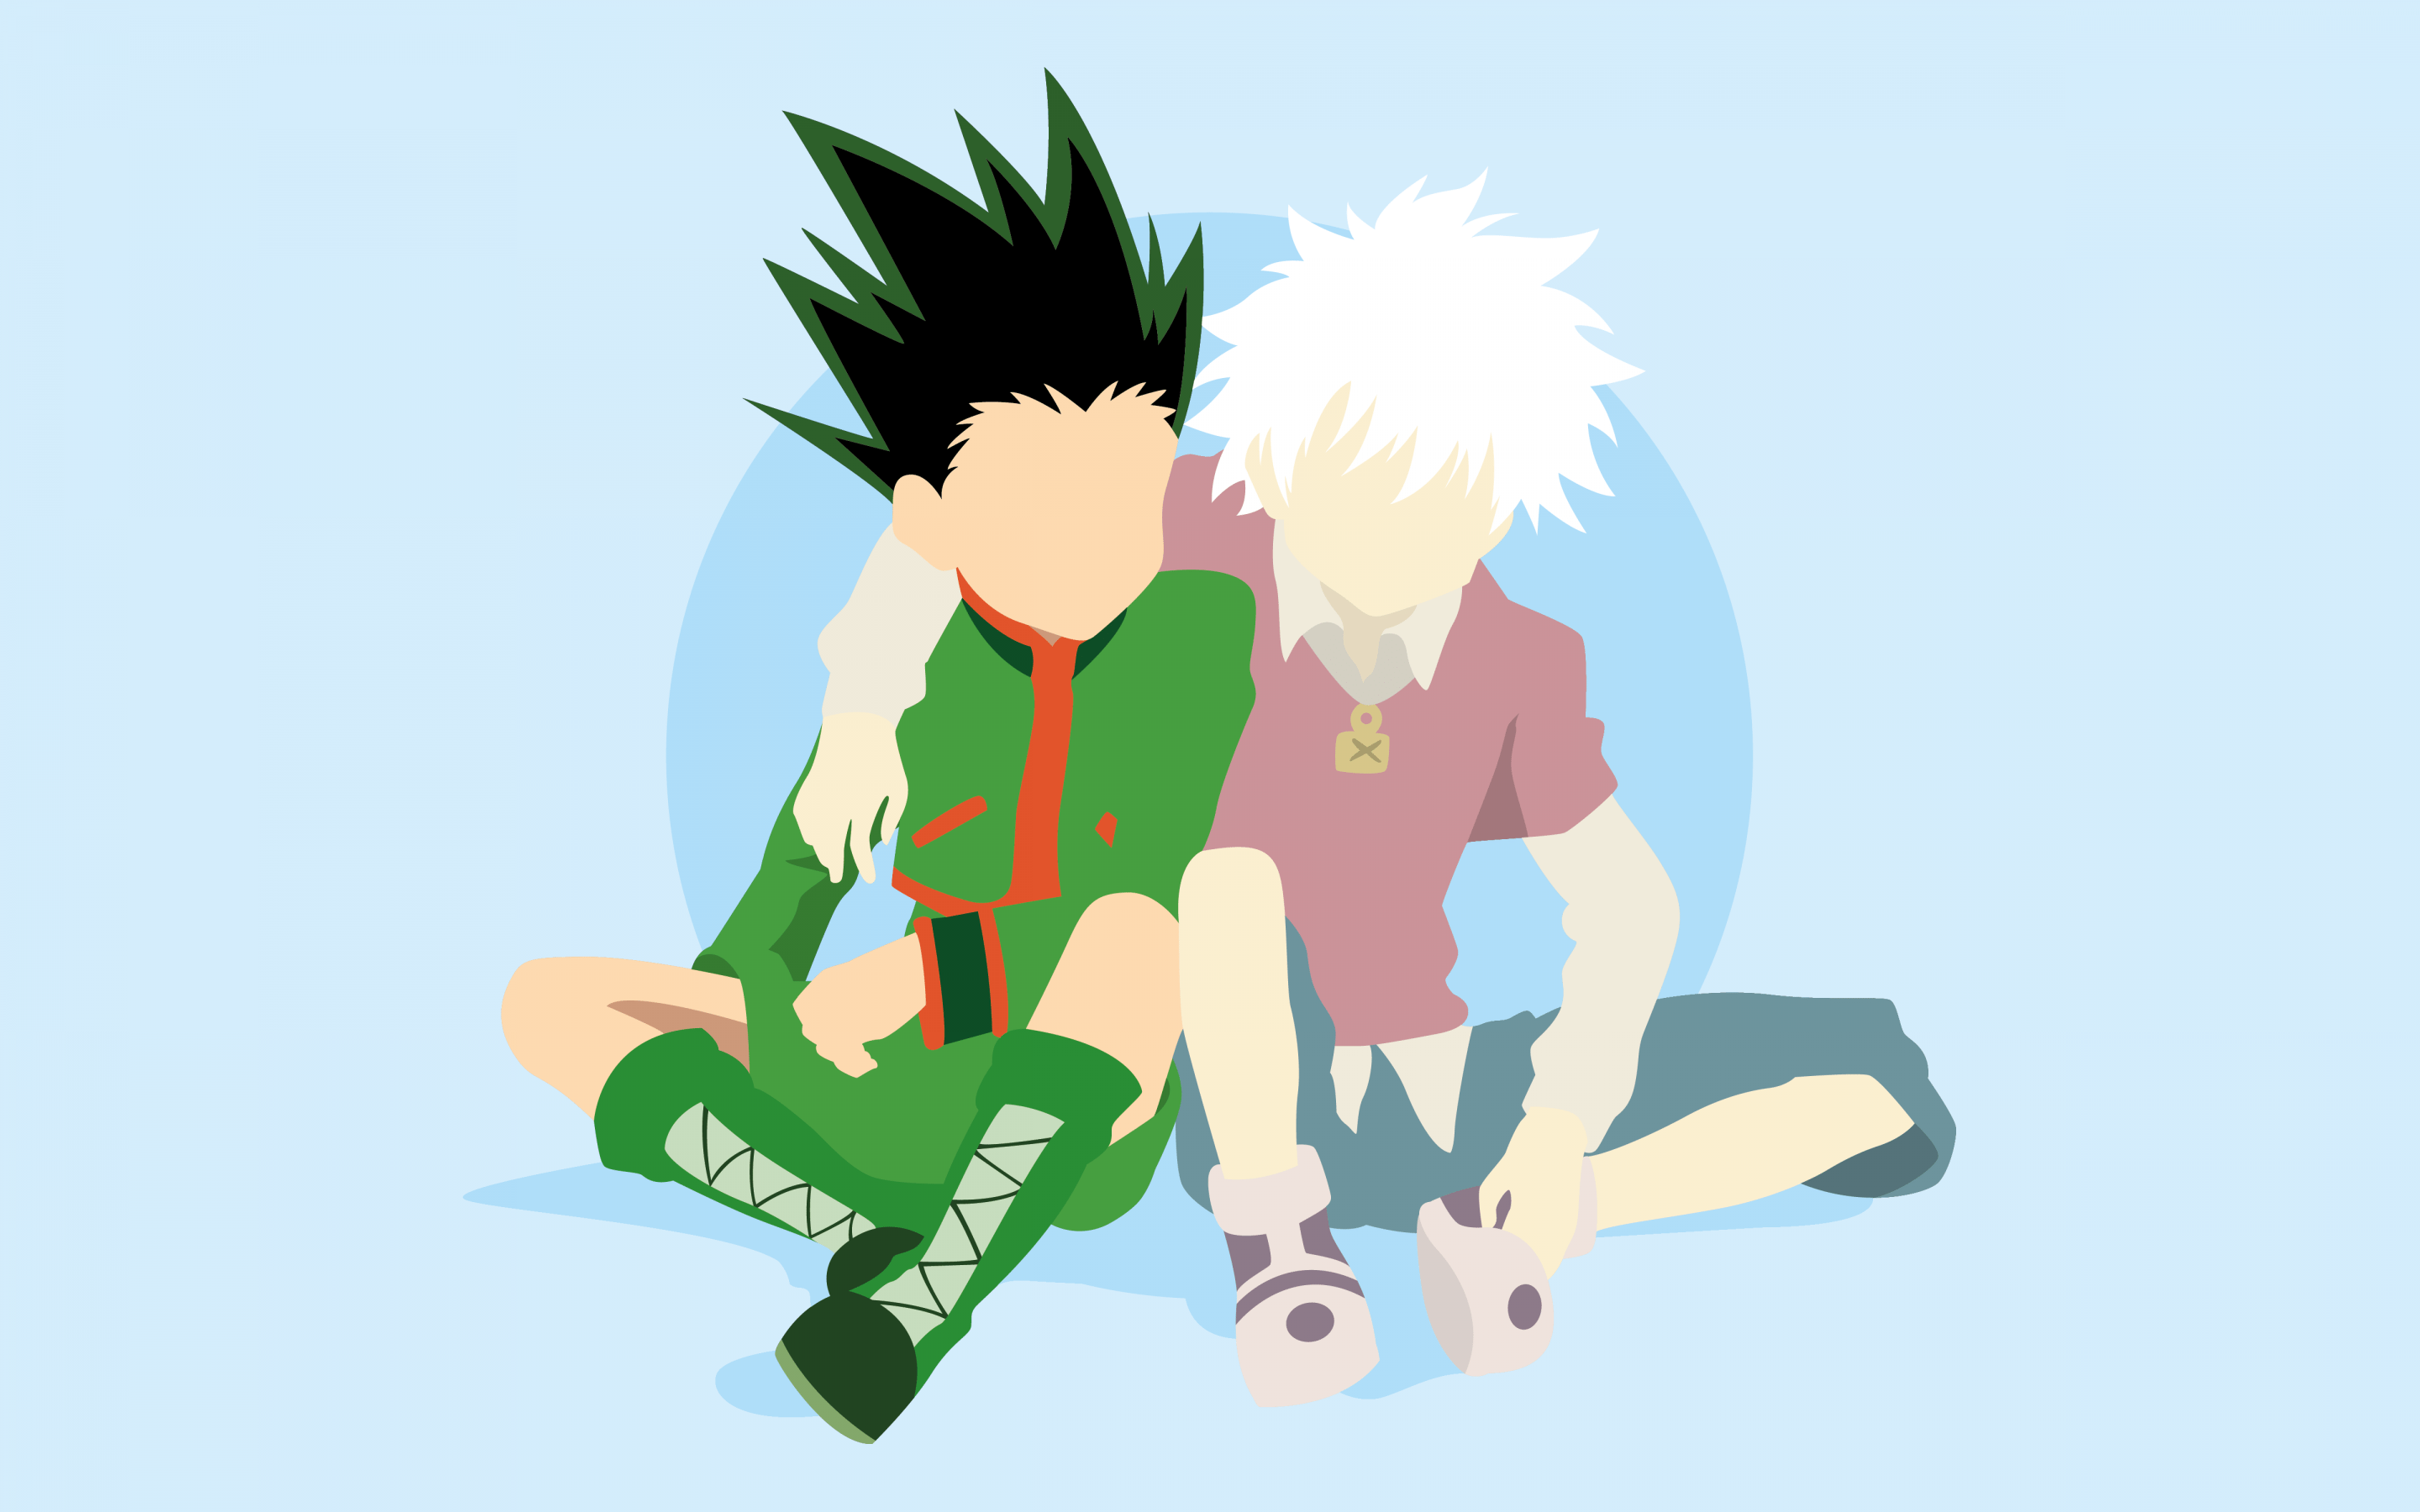 Gon and Killua, the two main characters of Hunter x Hunter, sit on the ground in a minimalist style. - Killua